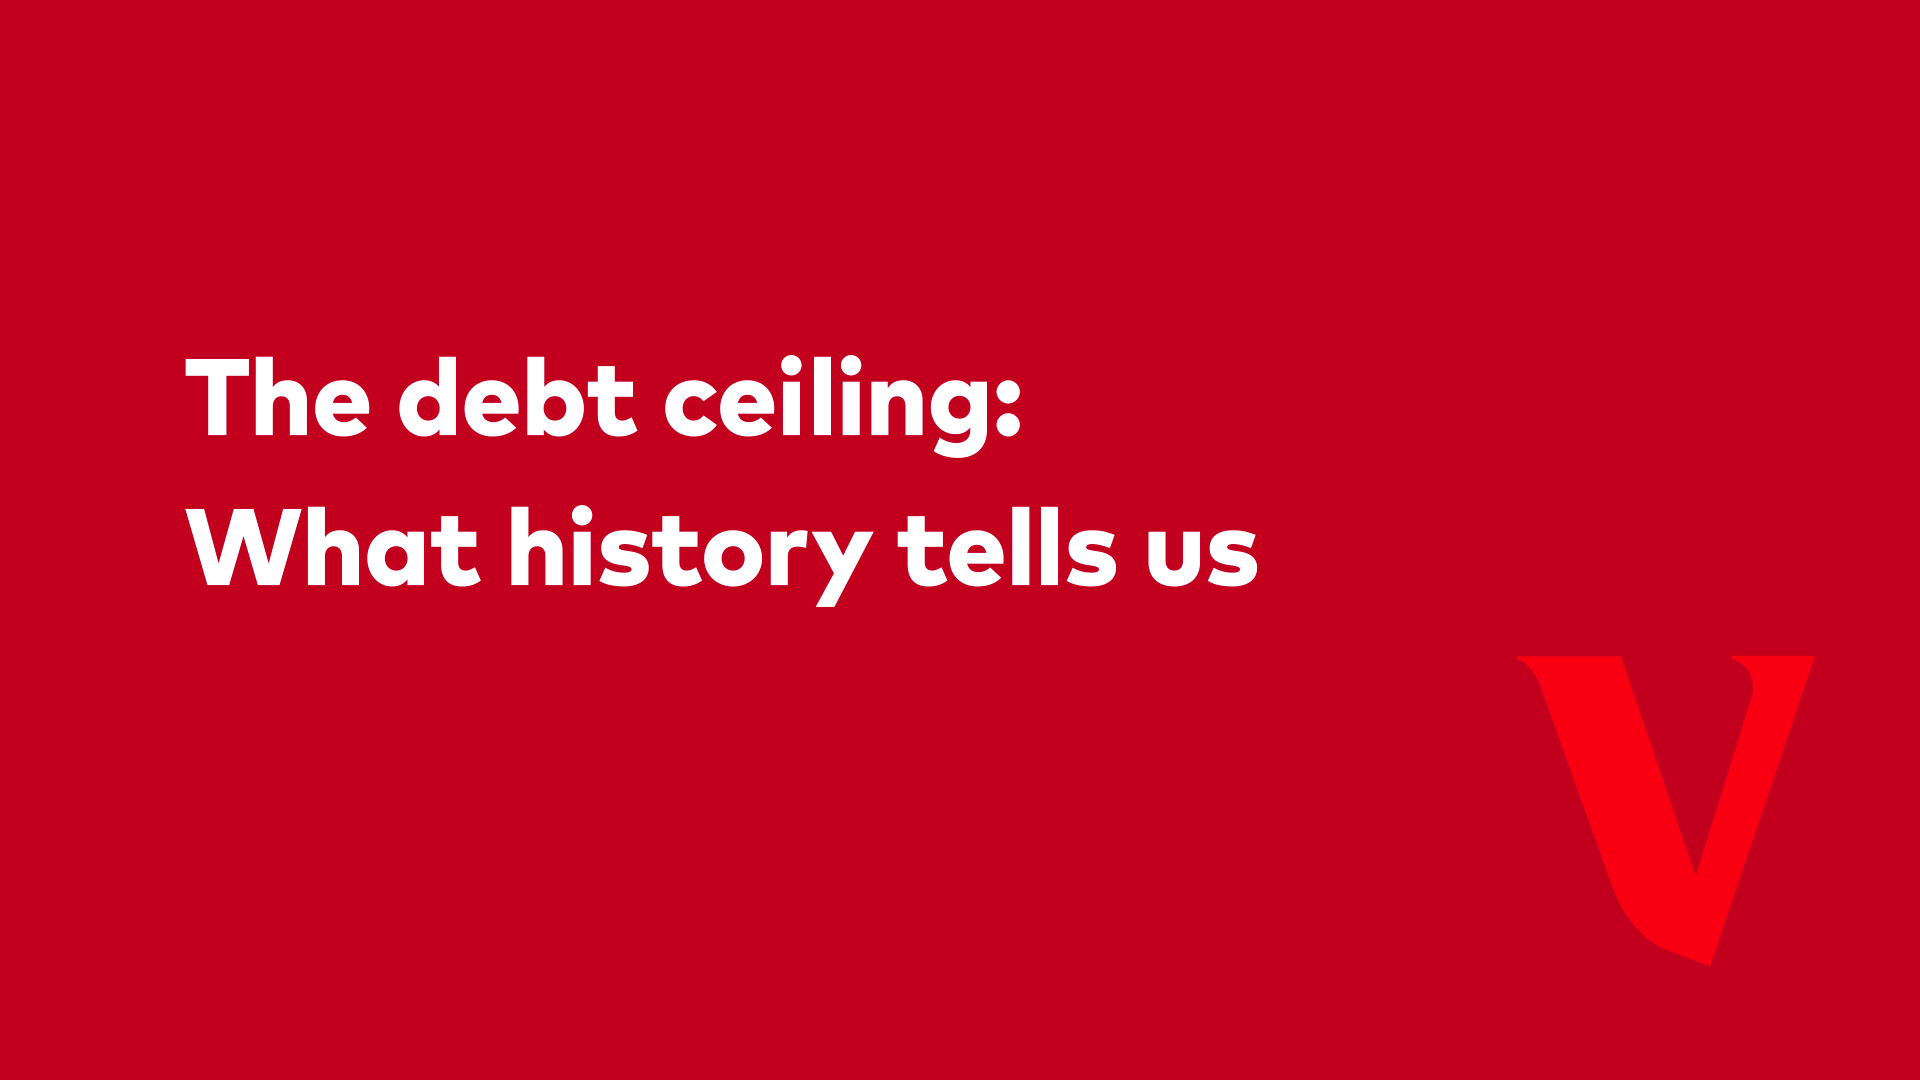 The debt ceiling: What history tells us